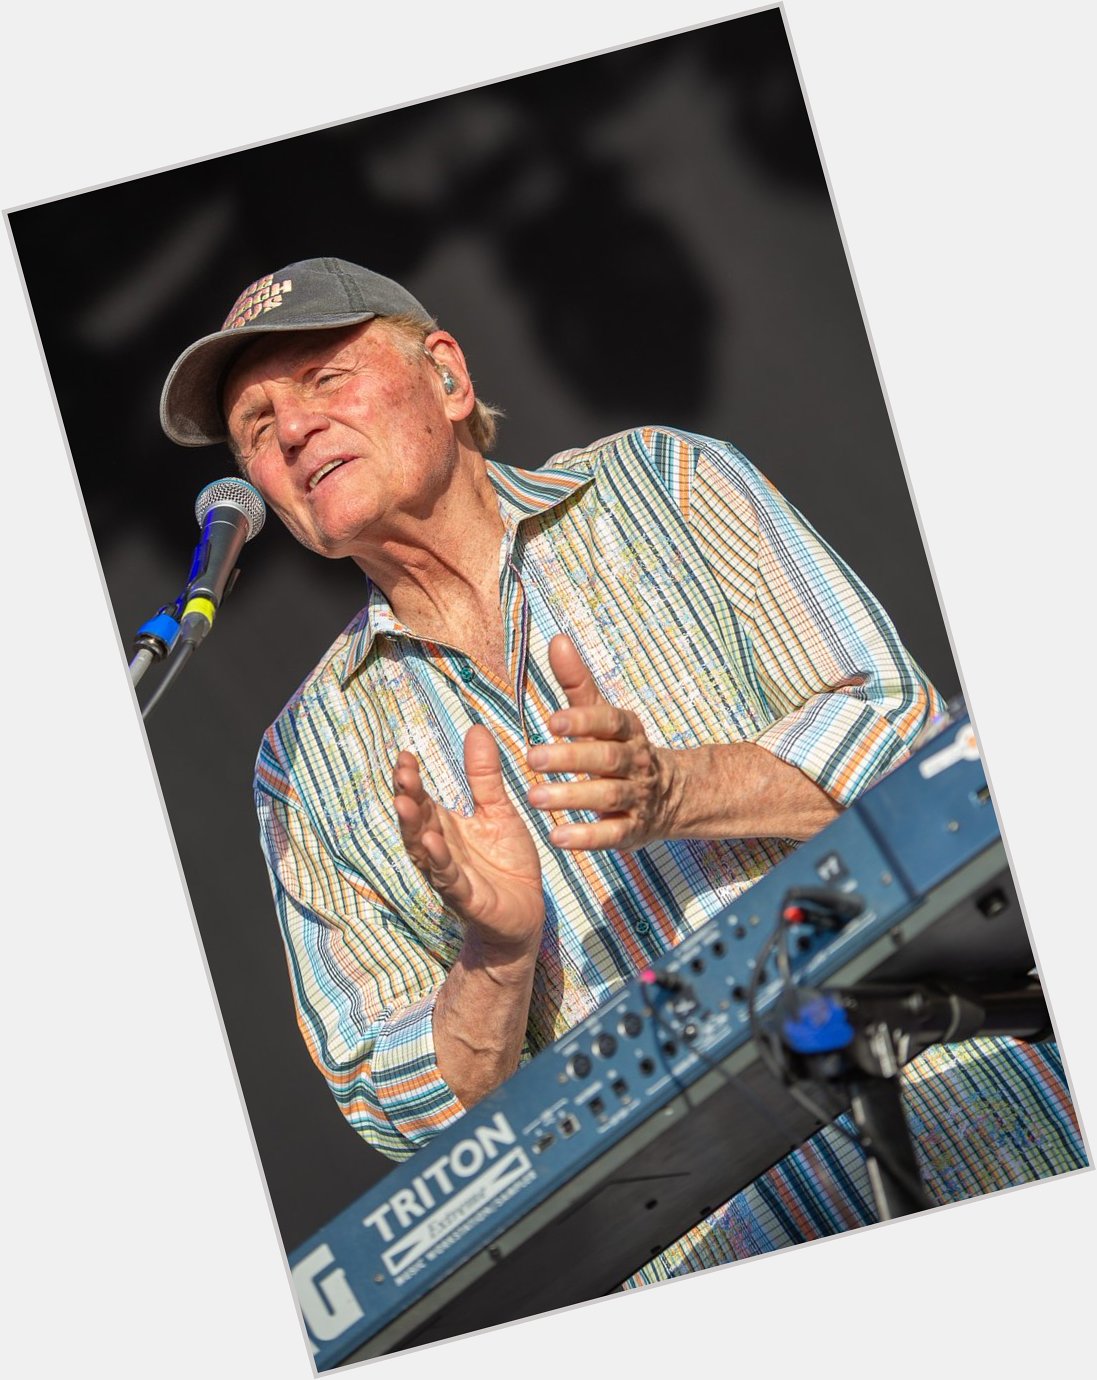 Happy Birthday Bruce Johnston of The Beach Boys! 81 years old today (June 27th). Playing \Disney Girls\ later  